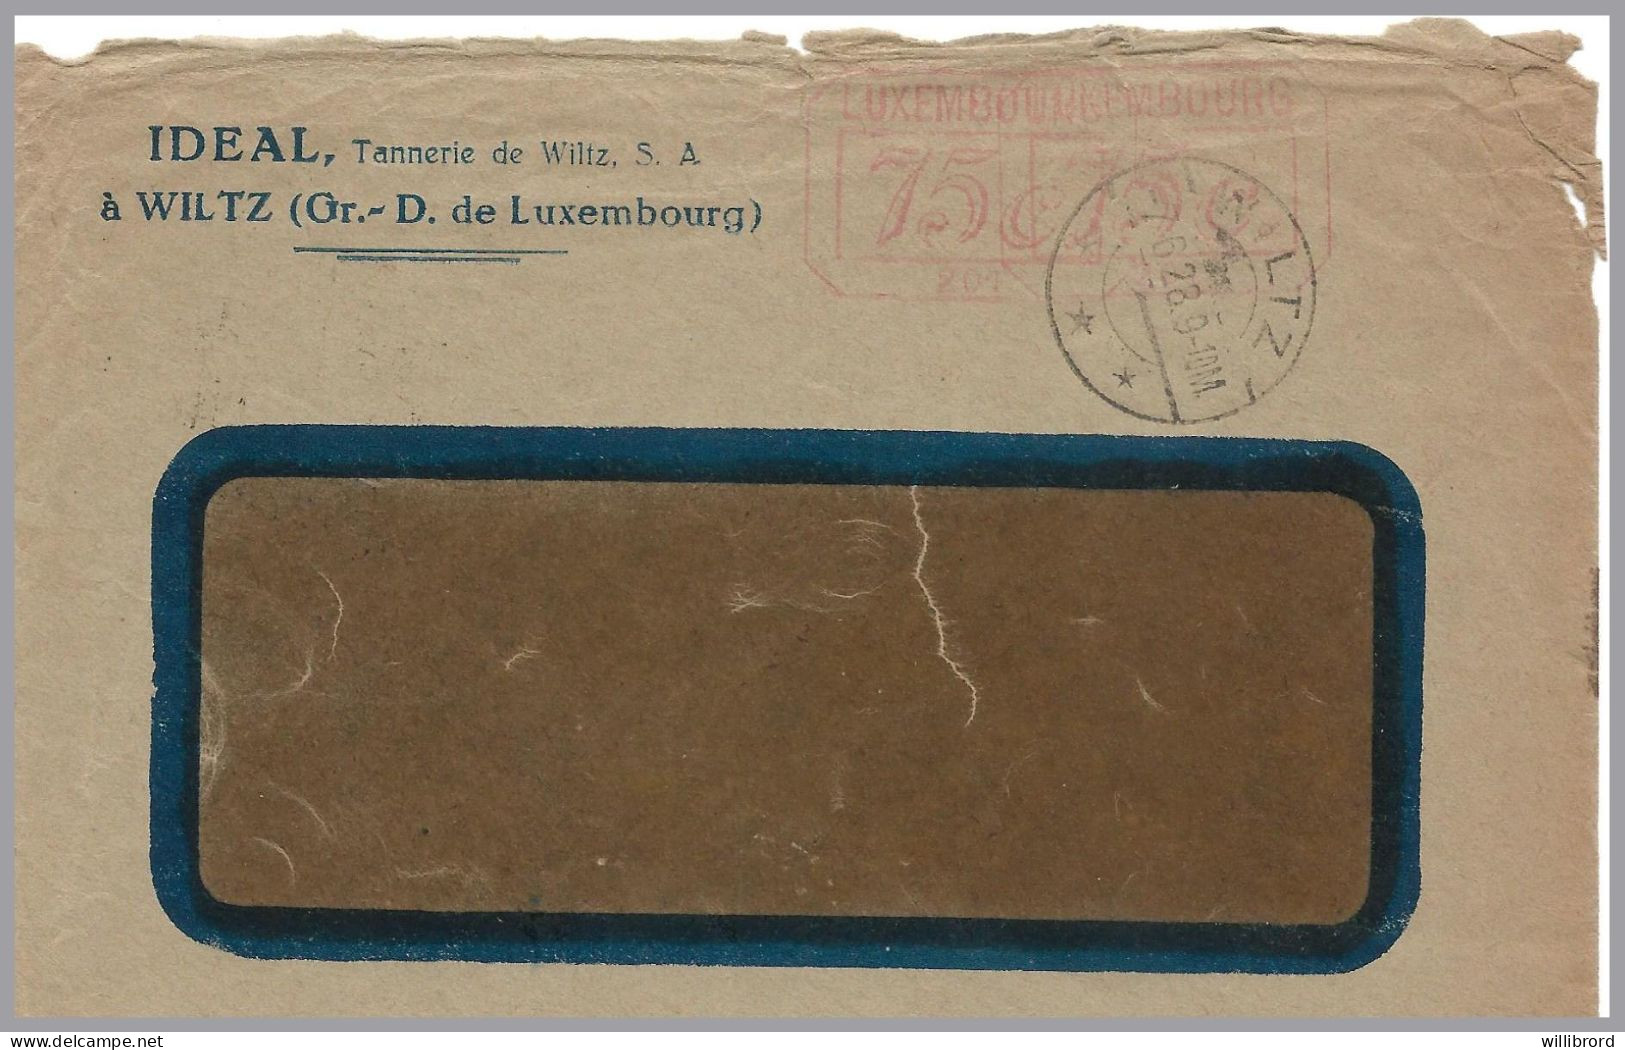 LUXEMBOURG - 1928 Timbrographe 201 Wiltz To Italy - RAREST Luxembourg Meter Imprint! Intl. Postage Meter Stp.Cat. = $100 - Lettres & Documents